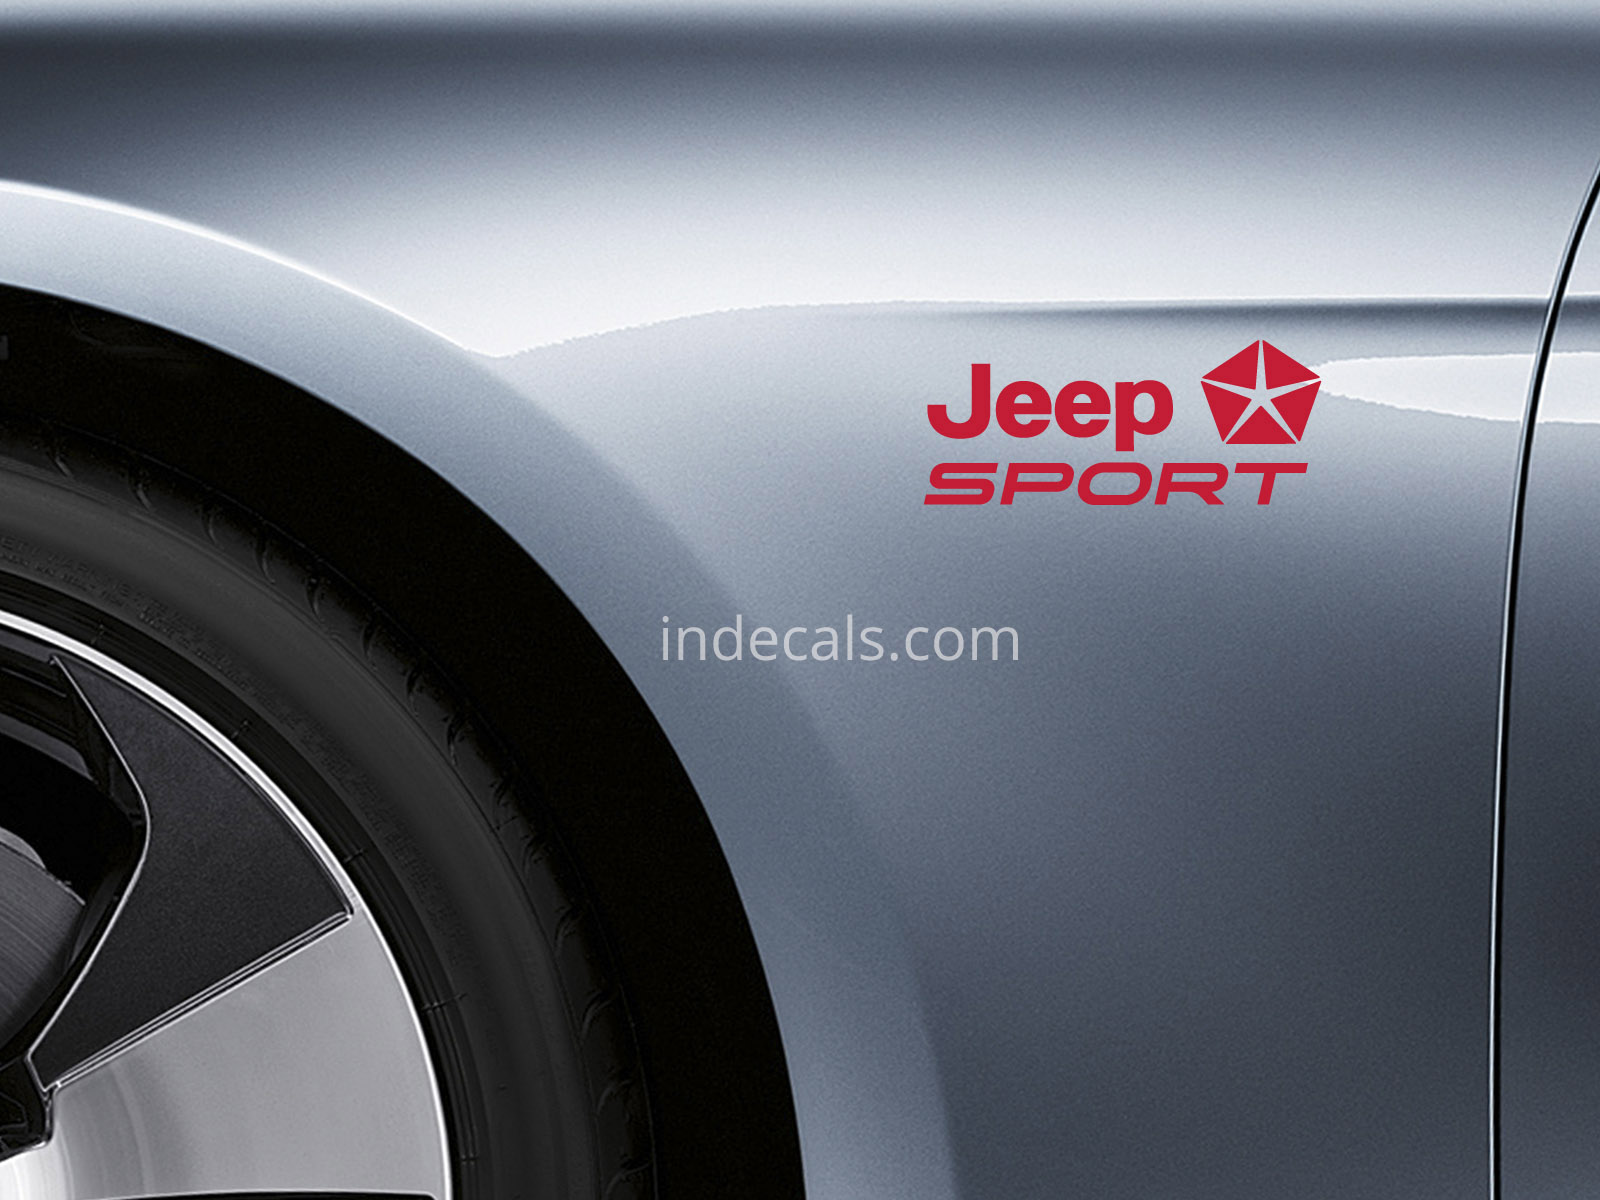 2 x Jeep Sports stickers for Wings - Red